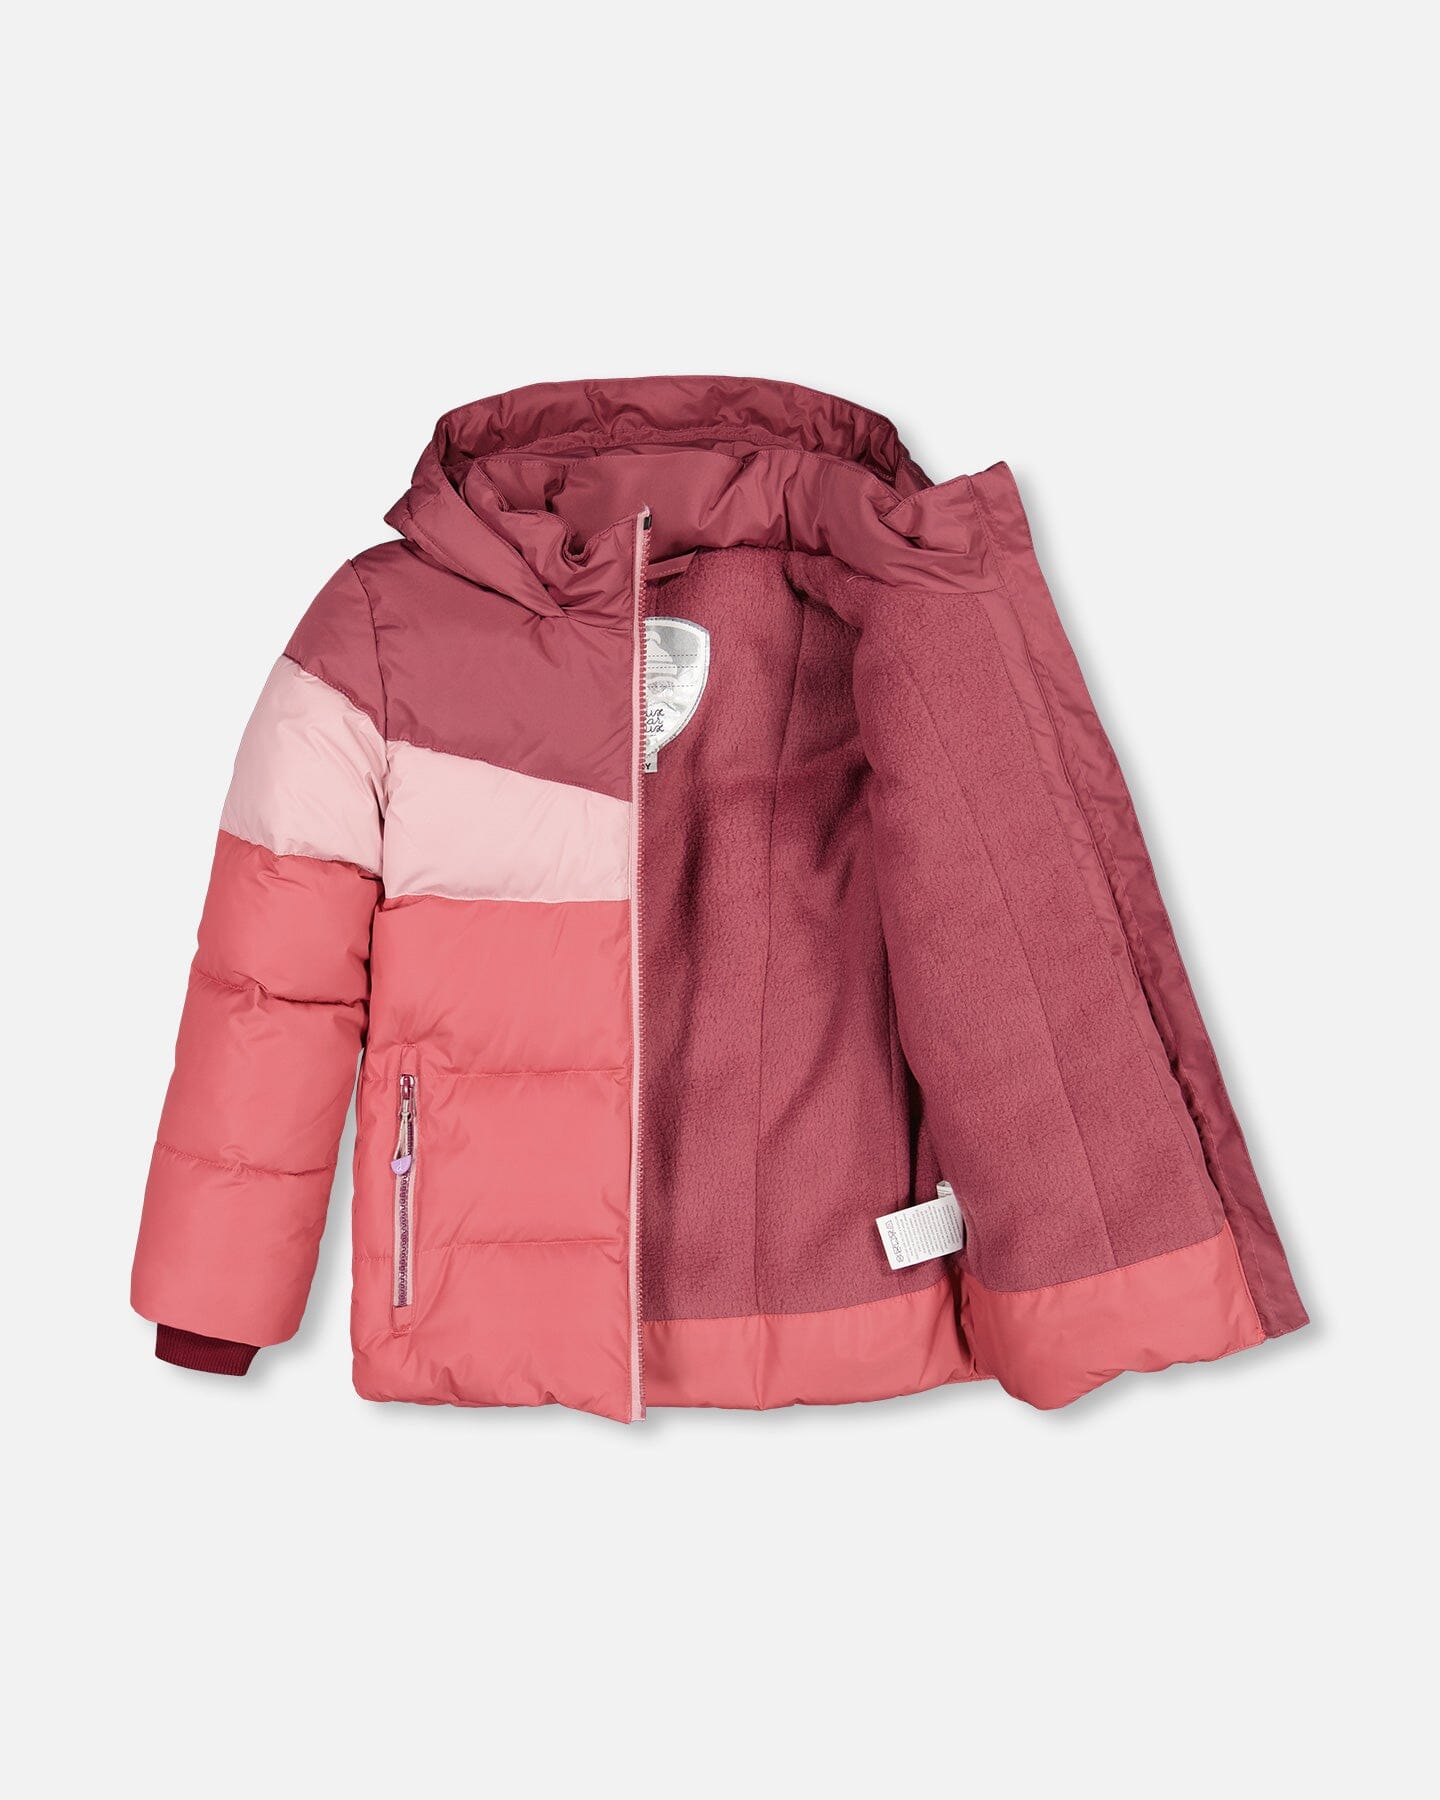 Puffy Jacket Pink And Plum Color Block